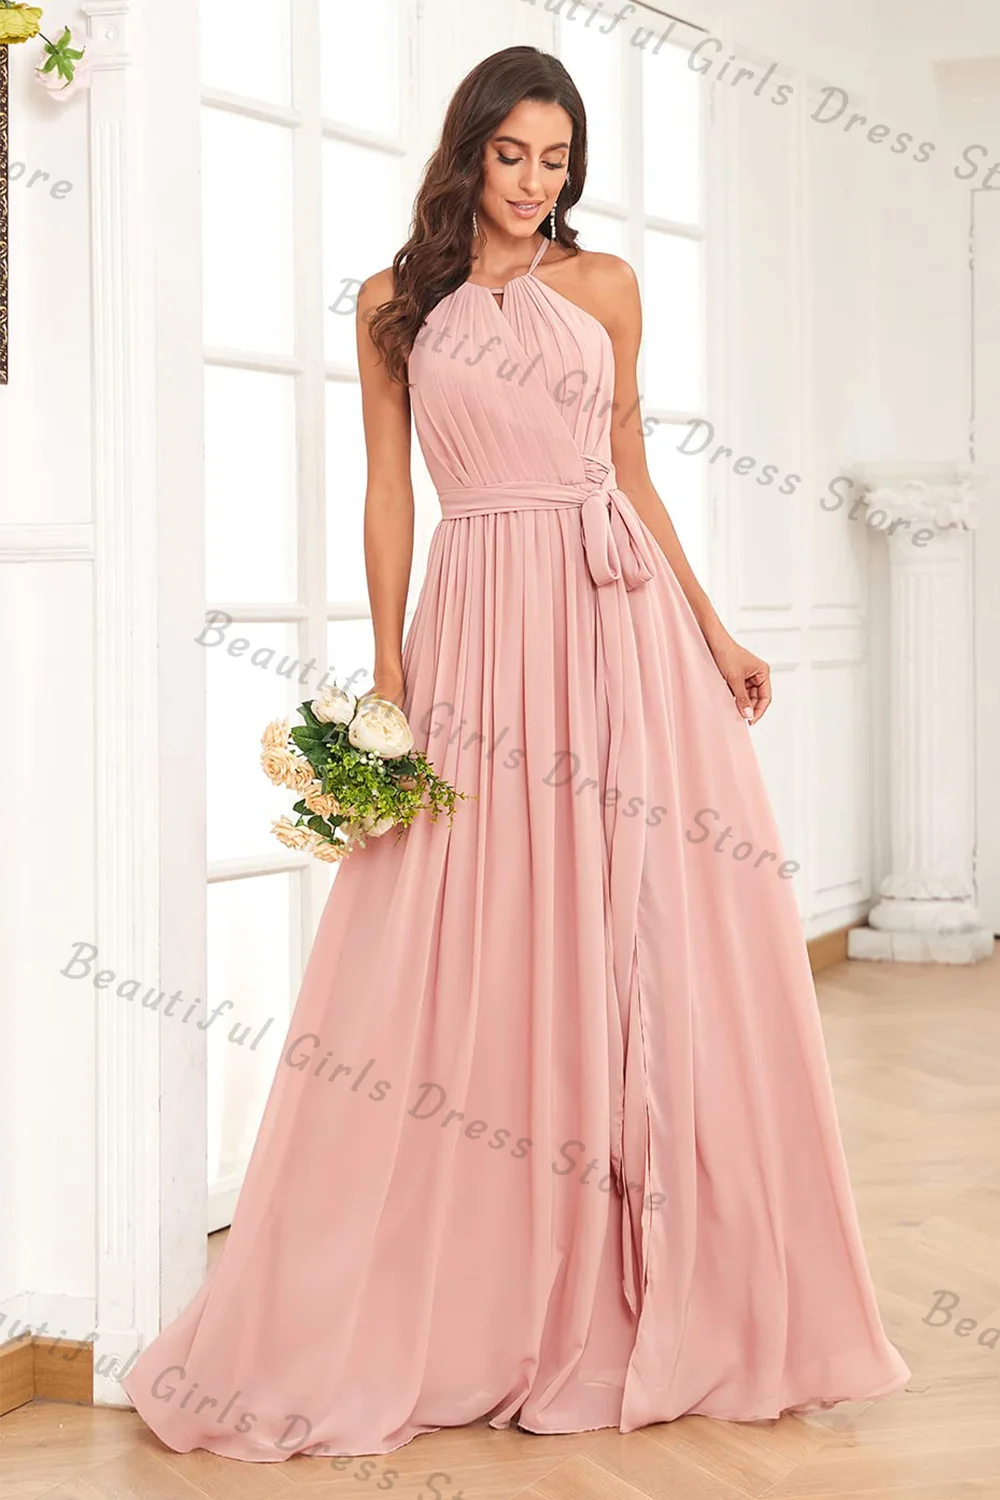 

Elegant Chiffon High Halter-neck Sleeveless Bridesmaid Dresses Pleated Corset Evening Gown Backless A-line Long Formal Prom Gown